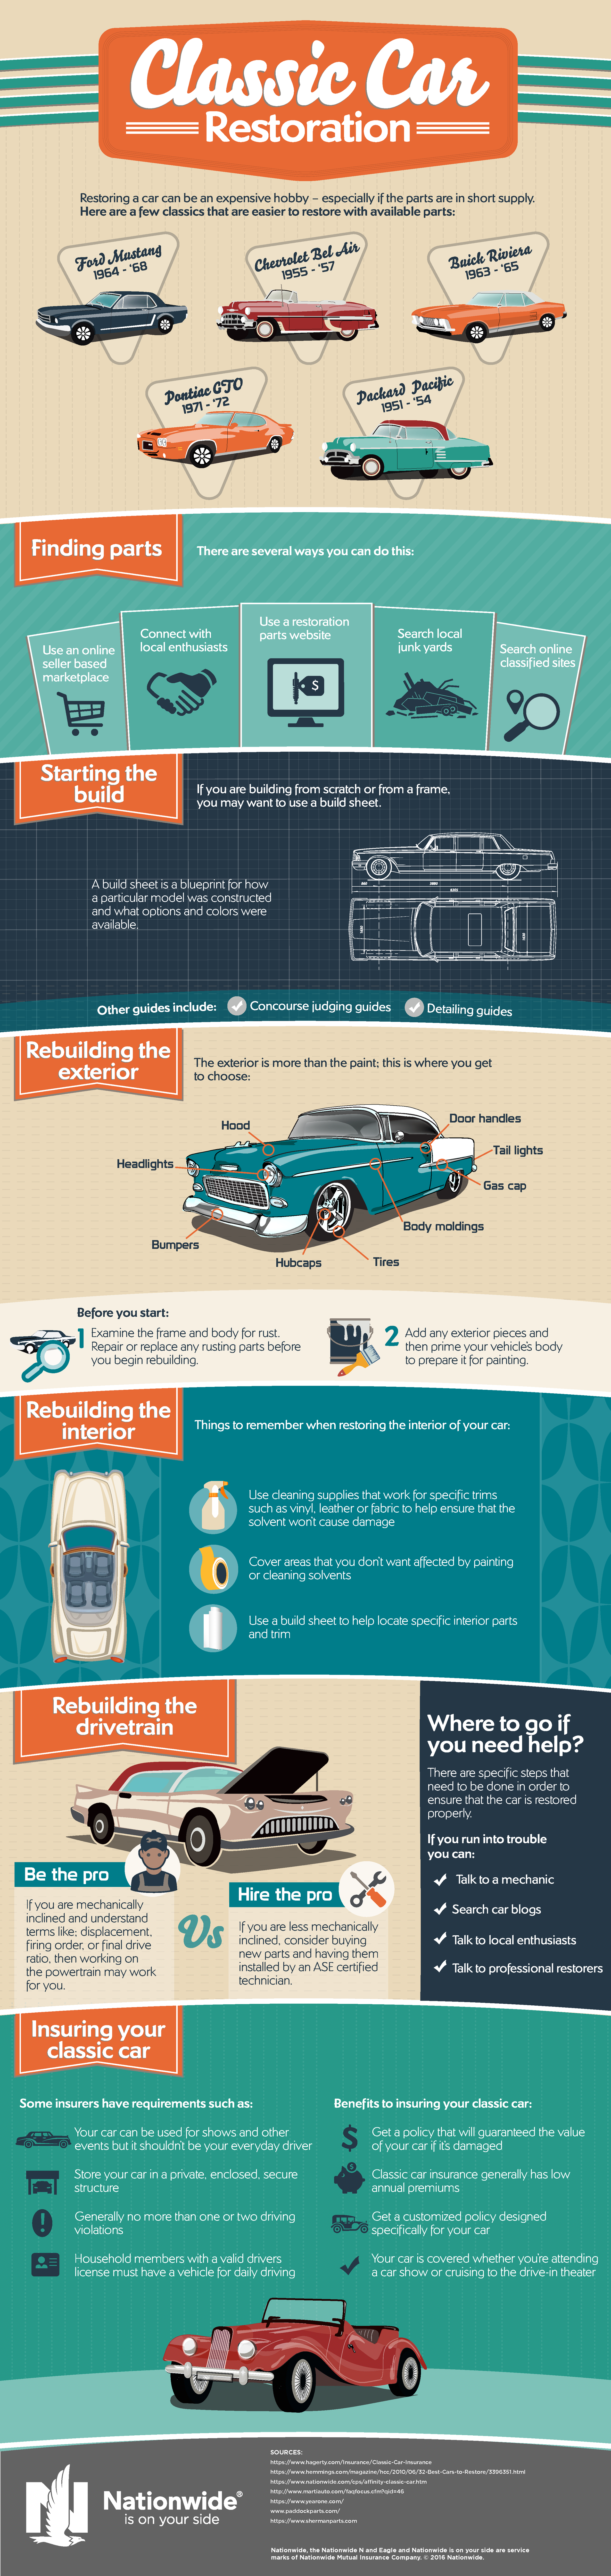 Classic Car Restoration: How To Restore a Classic Car [Infographic]